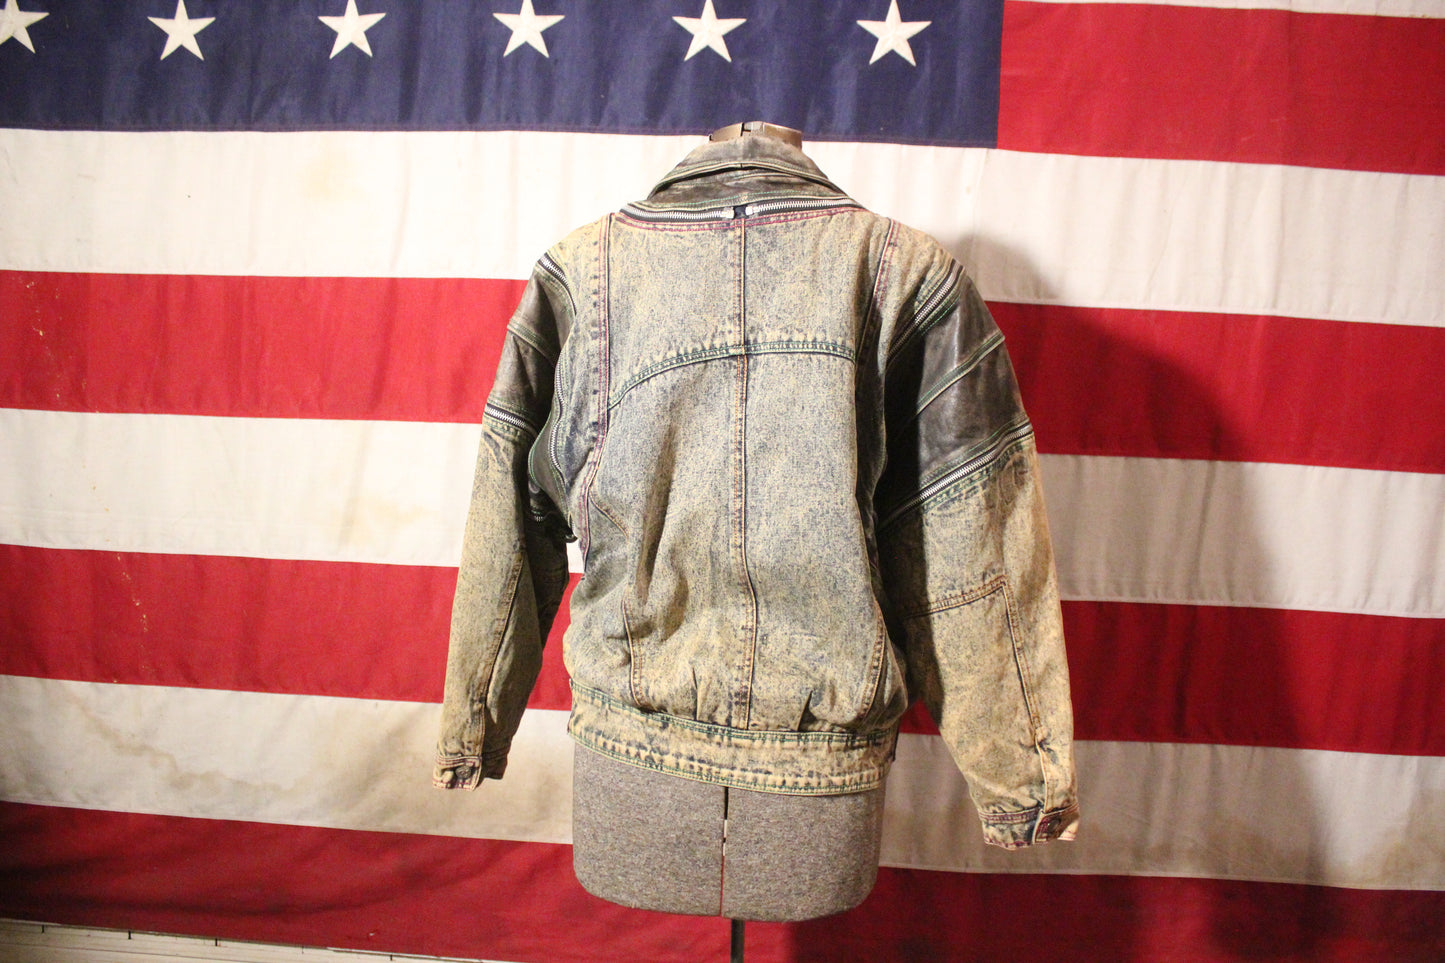 Denim and Leather "Zipperology" Jacket by Winlit, Size M